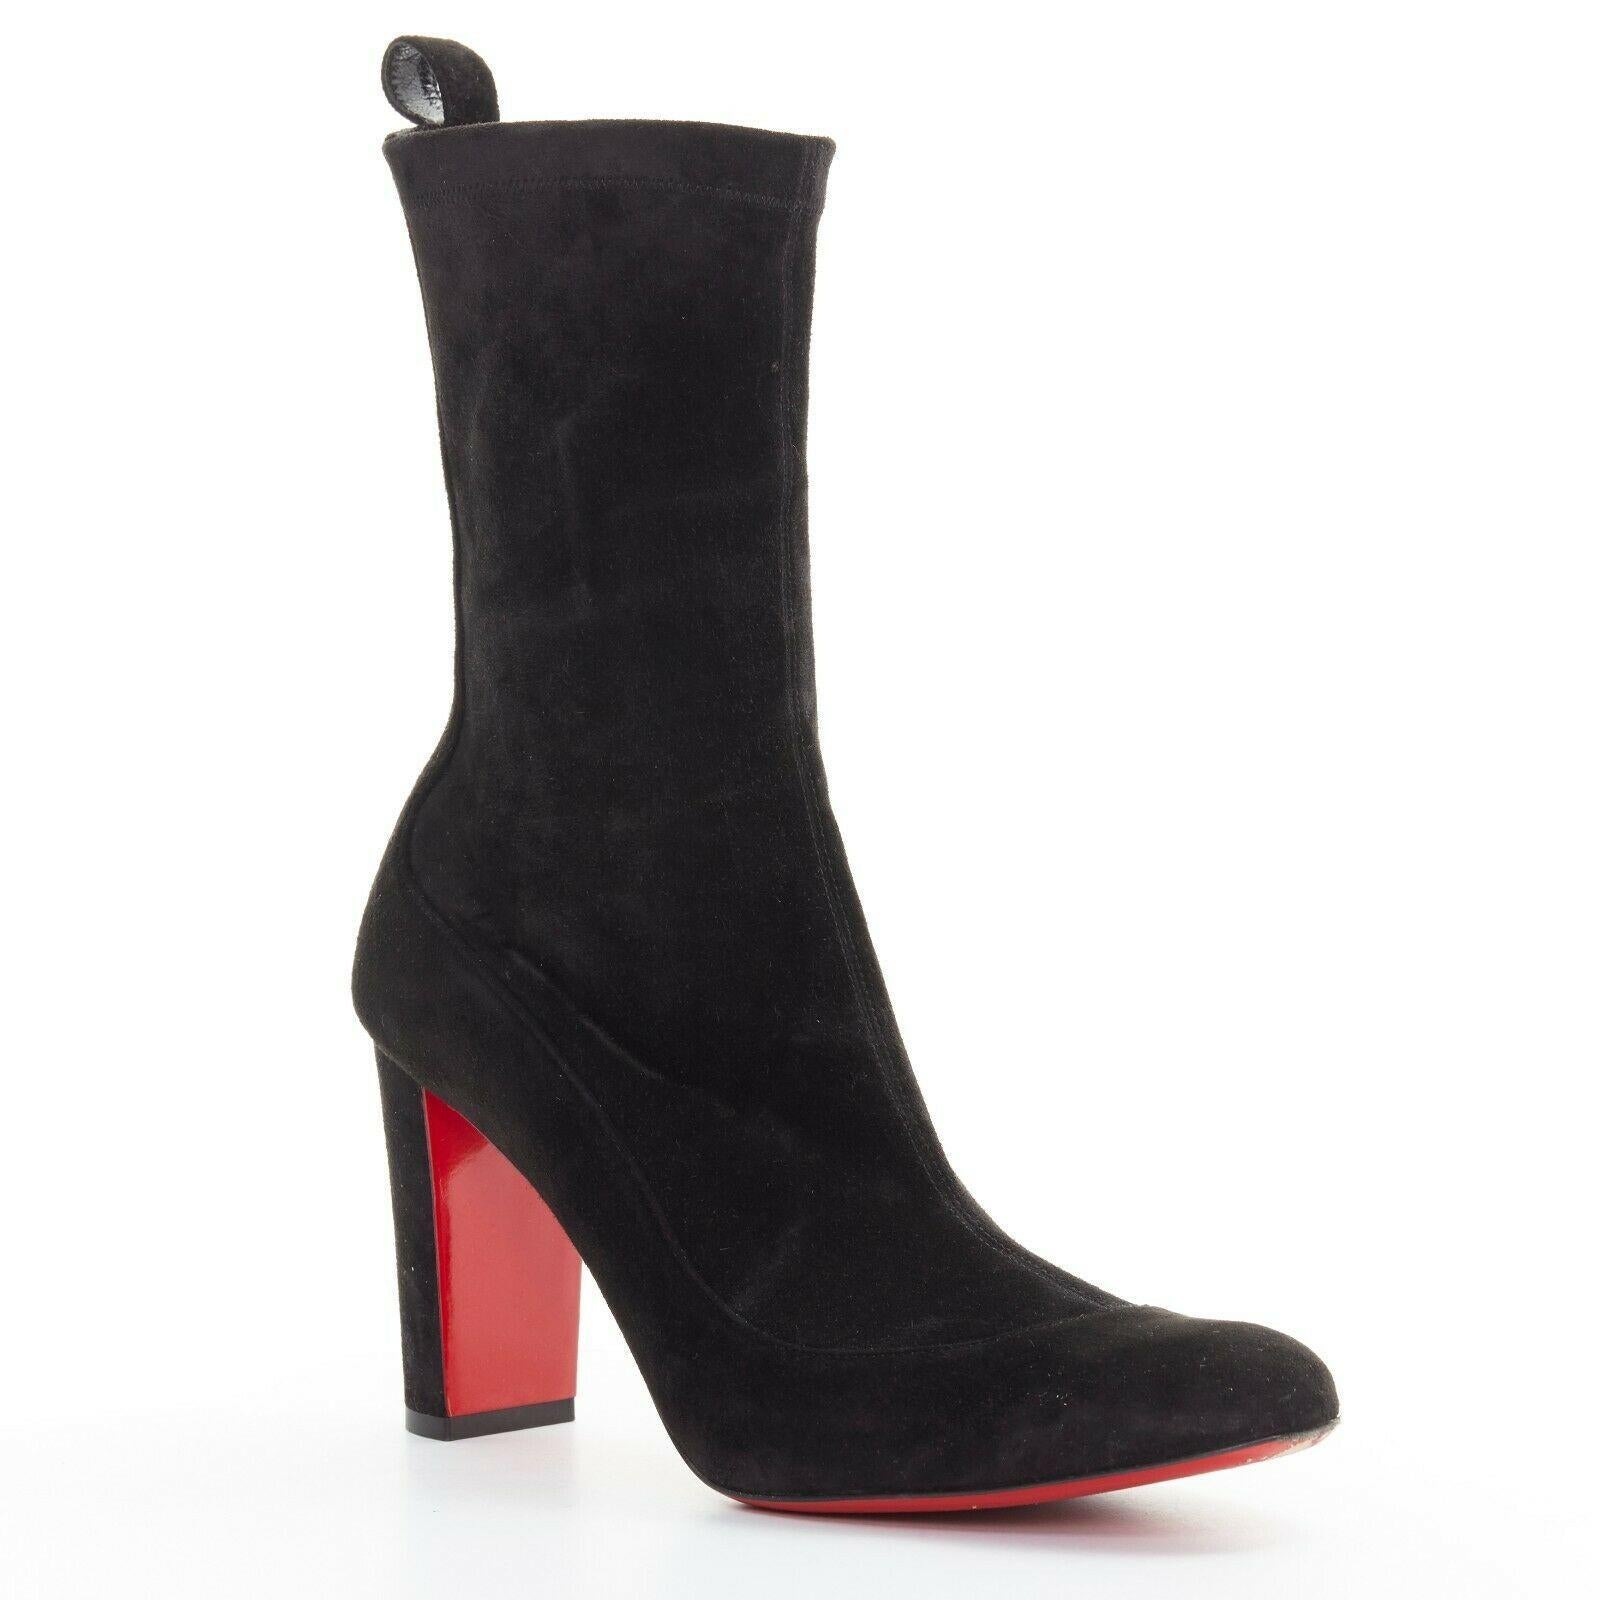 CHRISTIAN LOUBOUTIN Gena 85 black stretch suede chunky heel sock boot EU38.5
CHRISTIAN LOUBOUTIN
Gena Bootie 85. Veau velours black suede leather upper. 
Stretch fit. Round toe. Chunky heel. Tonal stitching. Padded tan leather lining. 
Signature